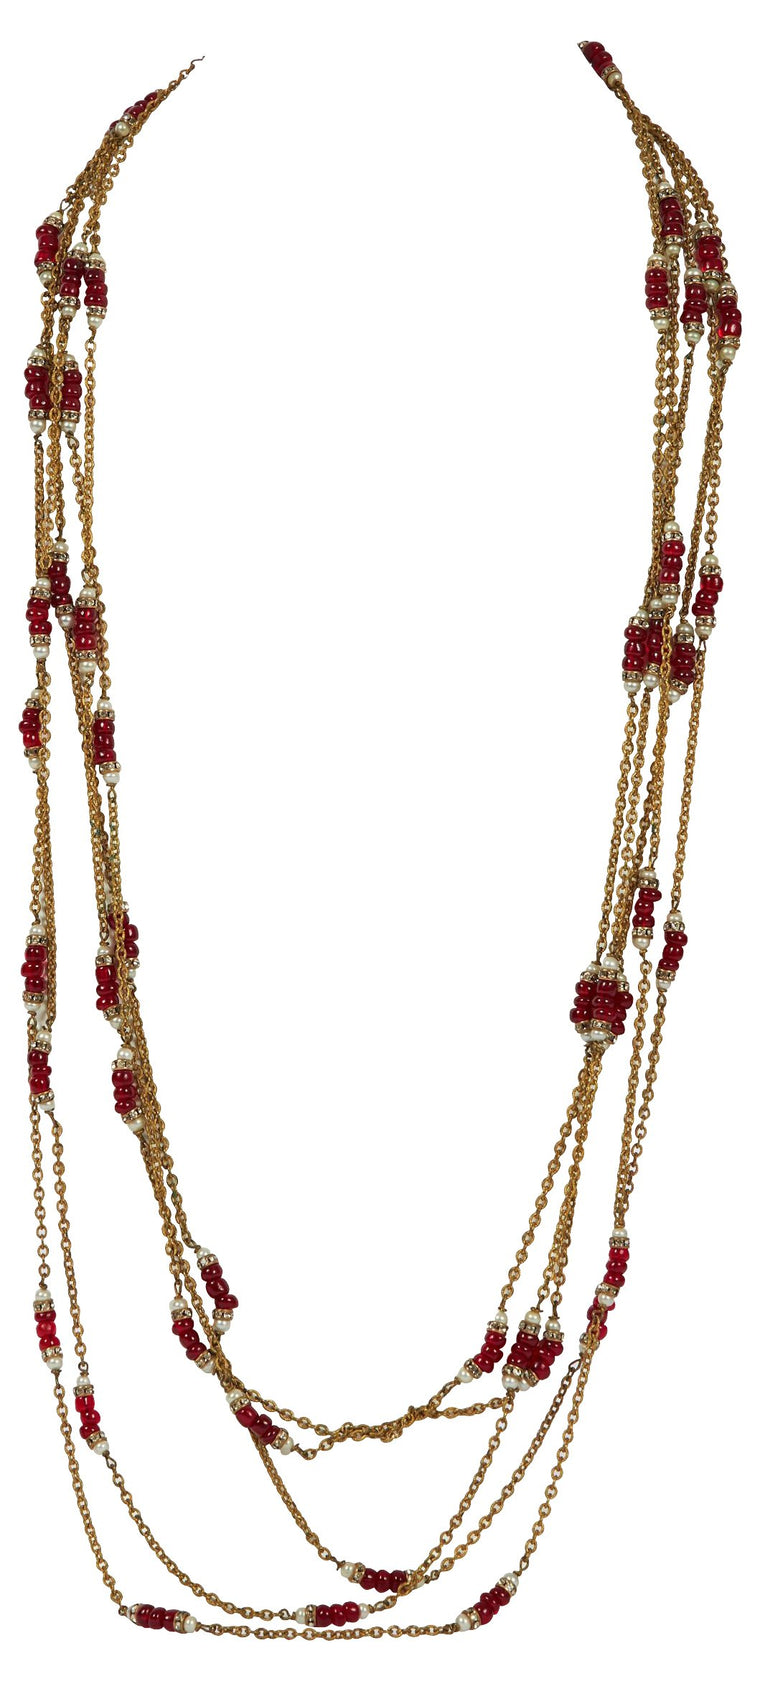 1960s Chanel Gripoix 5-Strand Necklace